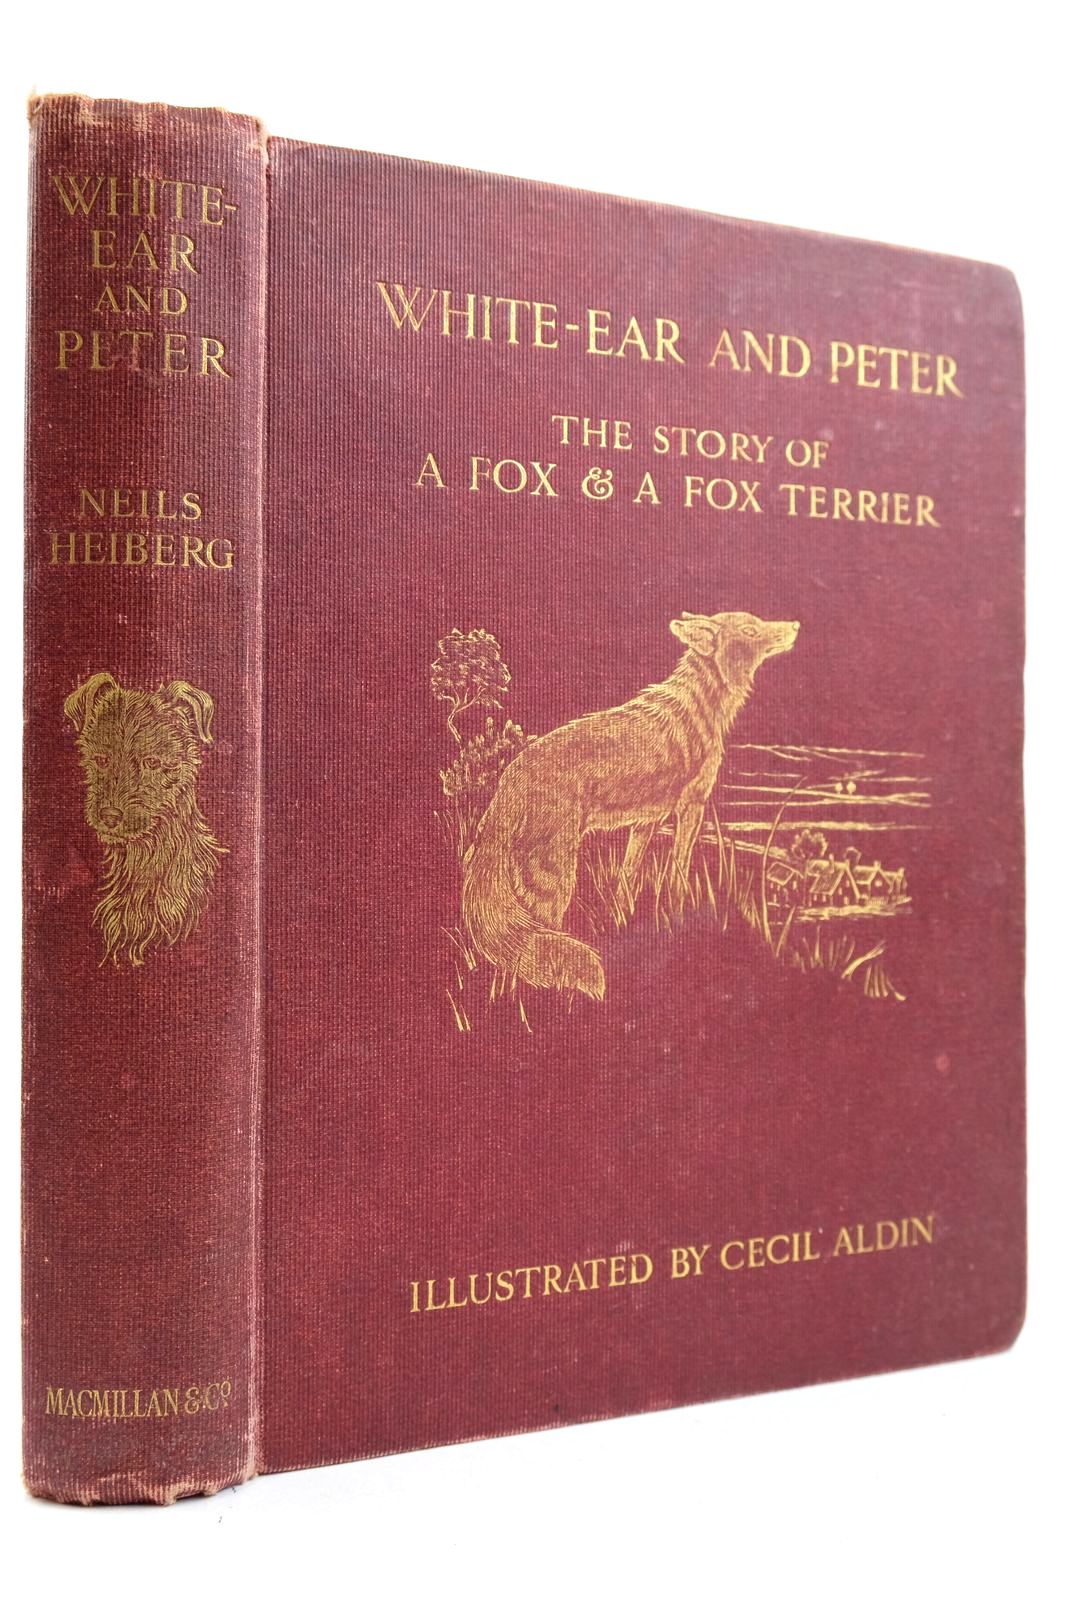 Photo of WHITE-EAR AND PETER- Stock Number: 2133287